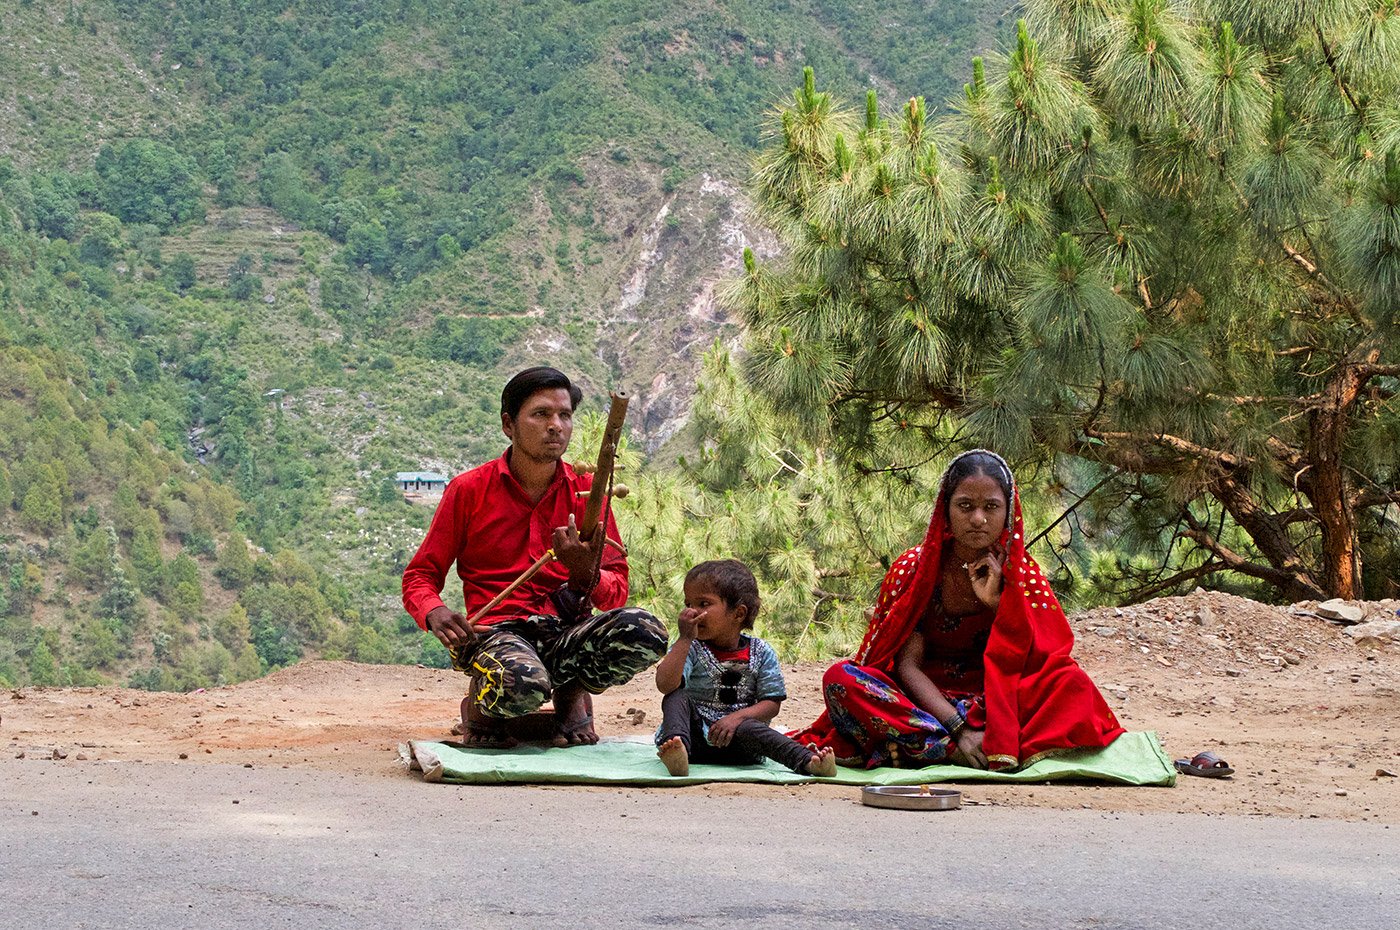 A man and his wife sitting on the side of the road in the moutains. the man is holding an instrument called ravanahatha in his hands